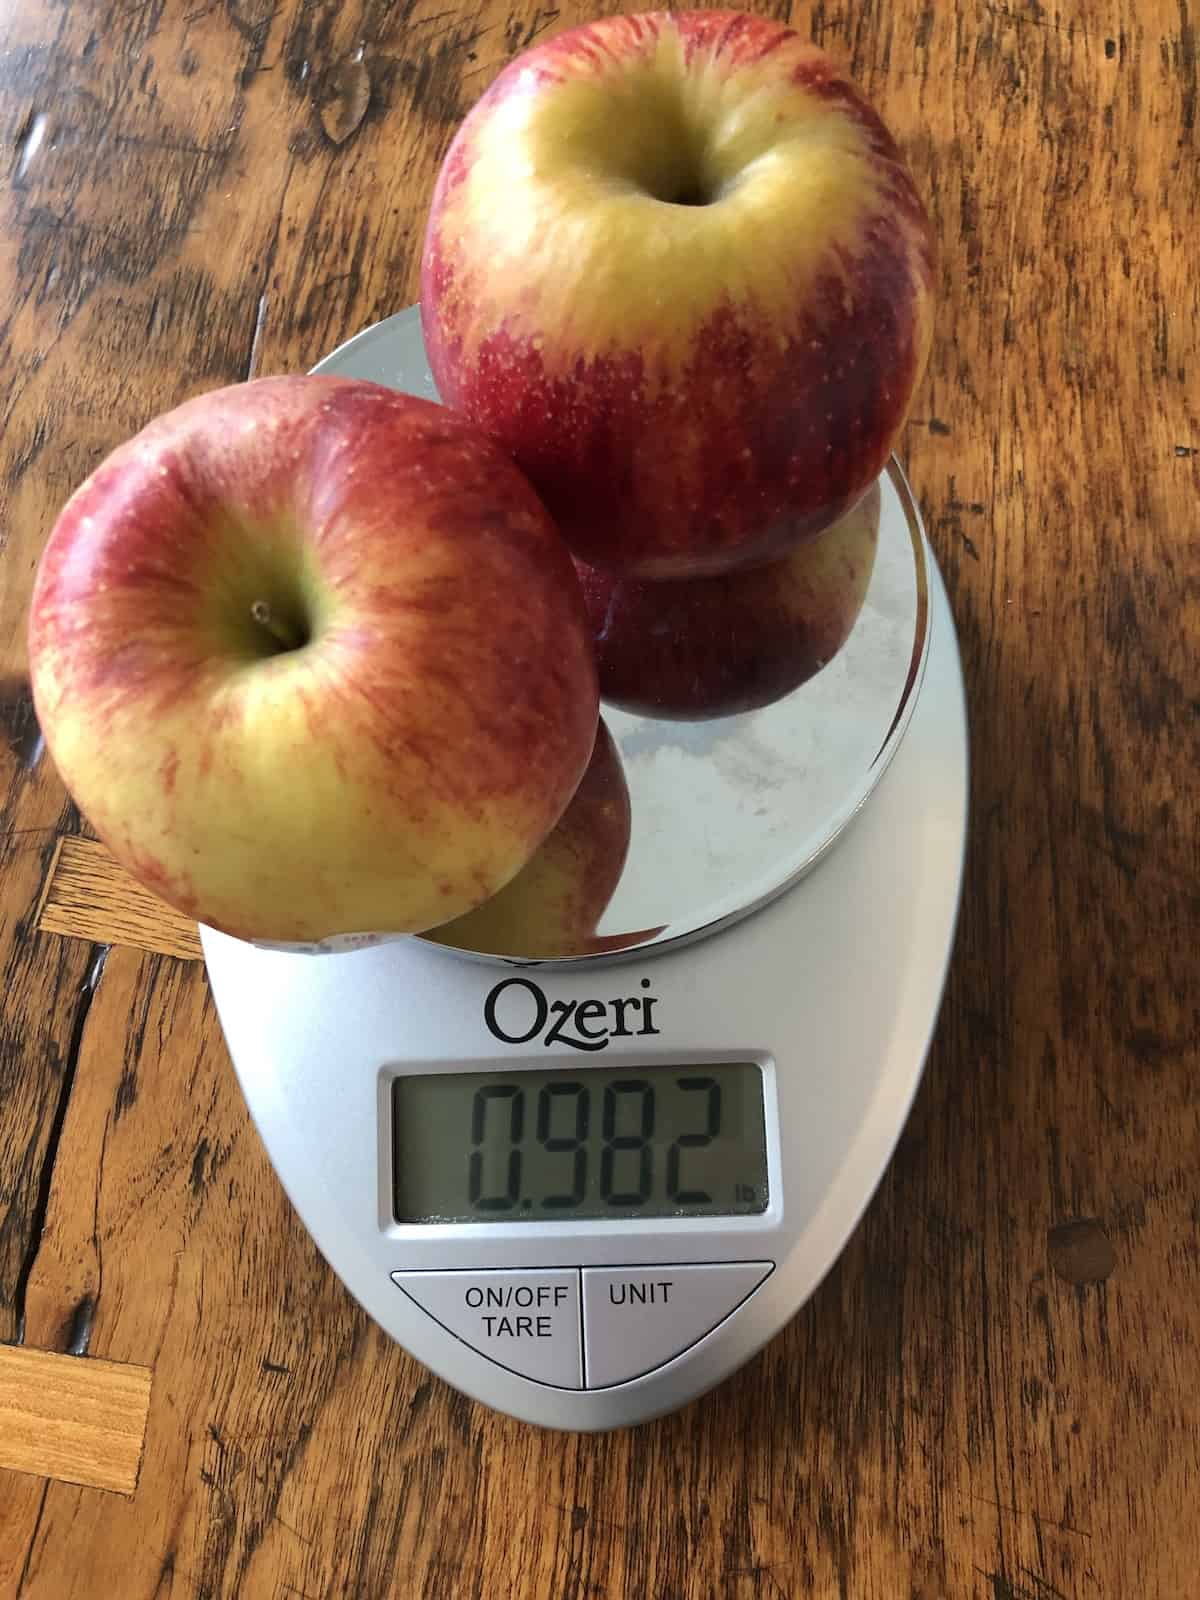 One pound of envy apples on a scale - weight shown